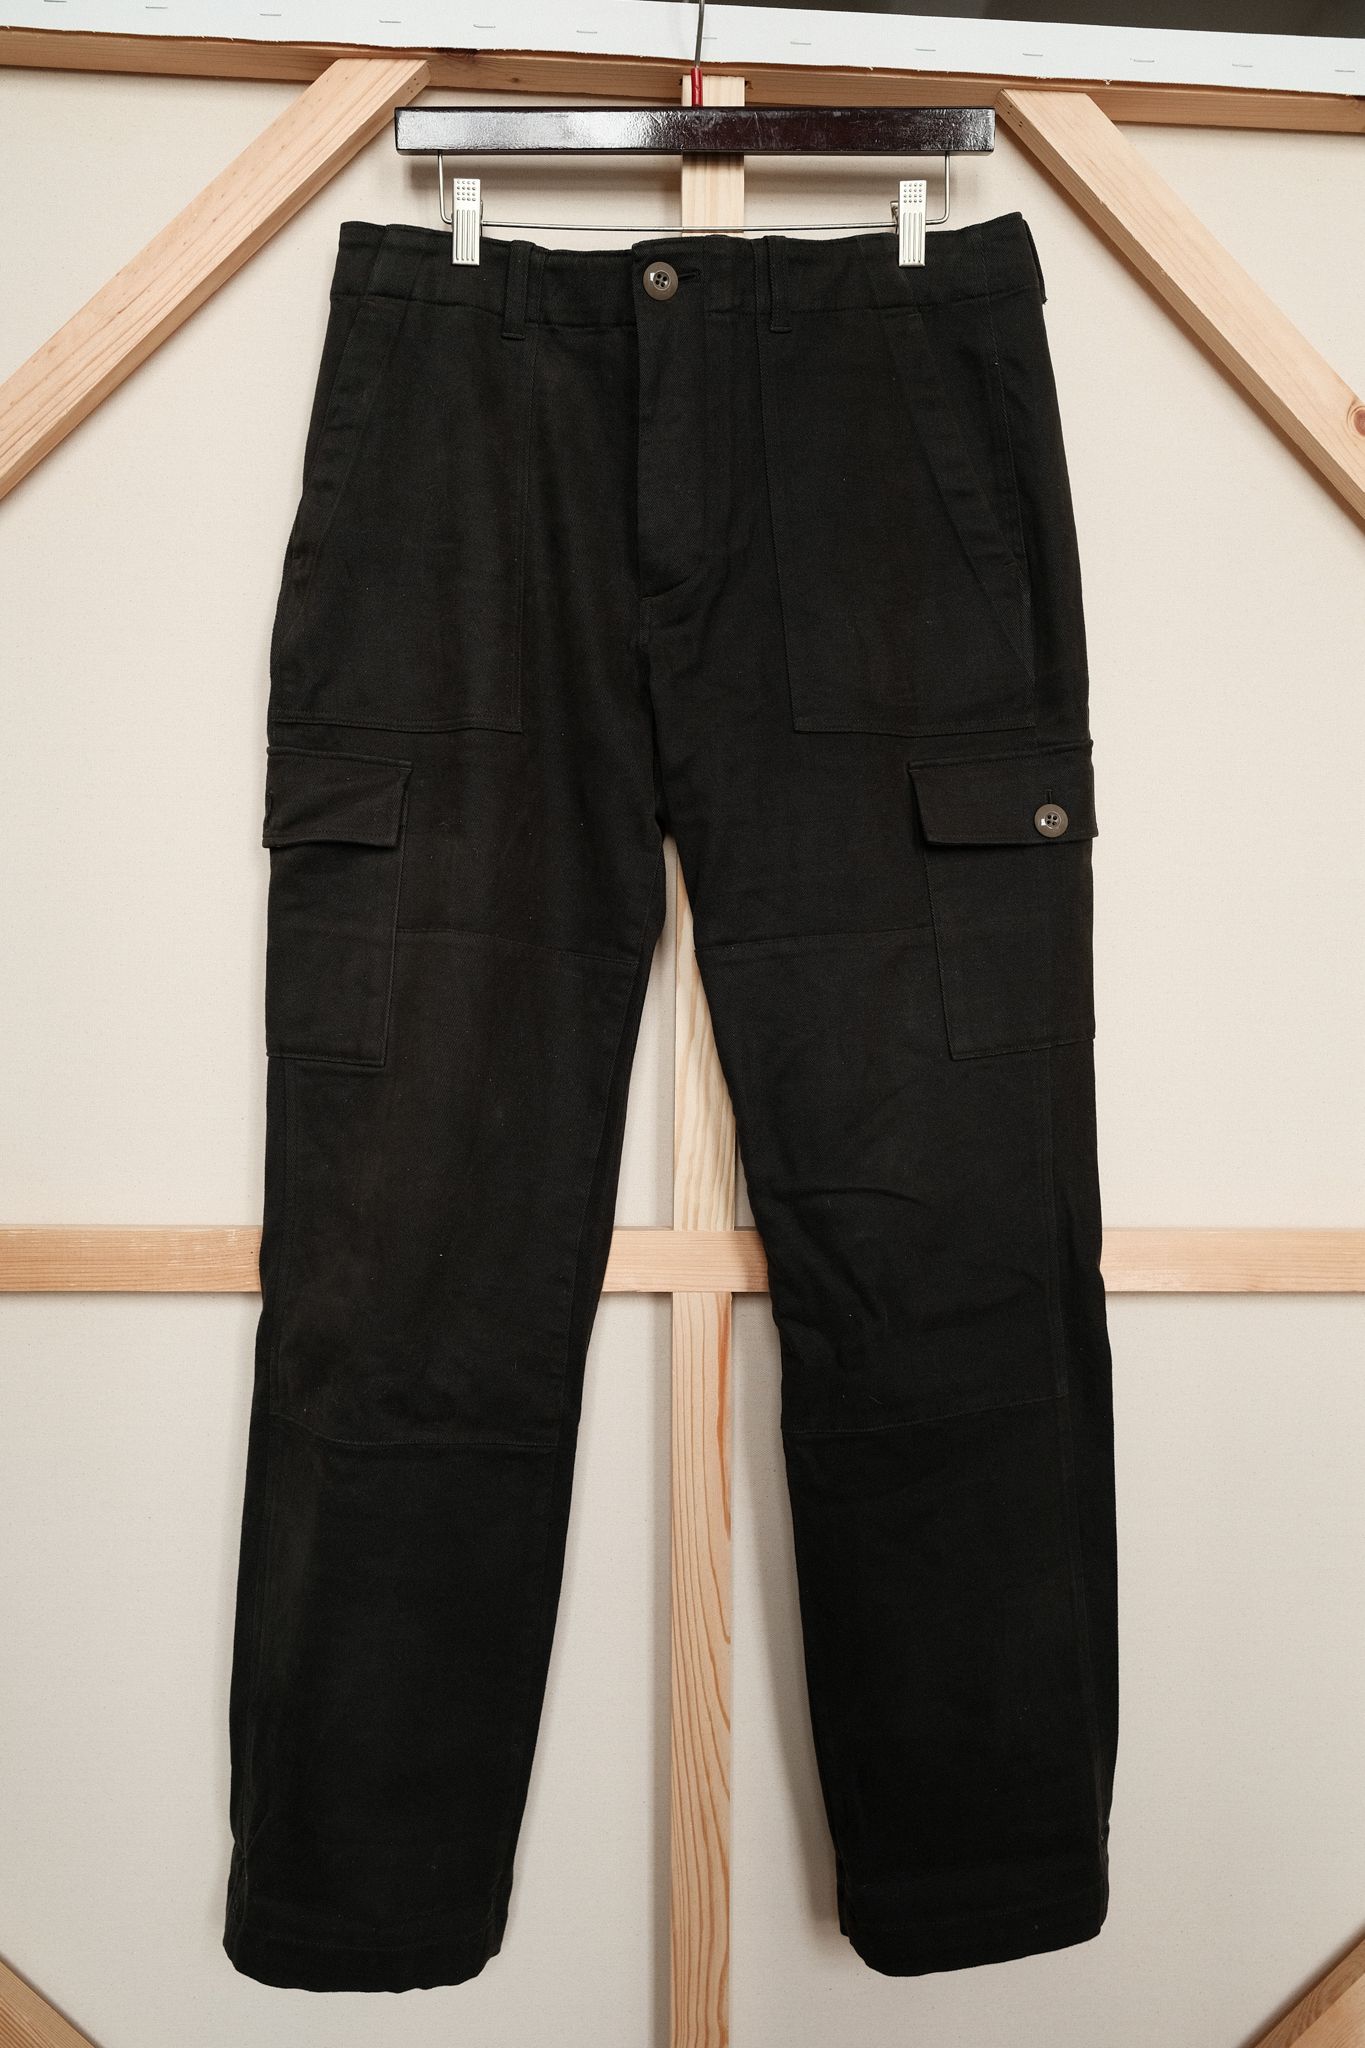 Todd Snyder Cargo Pants | Grailed